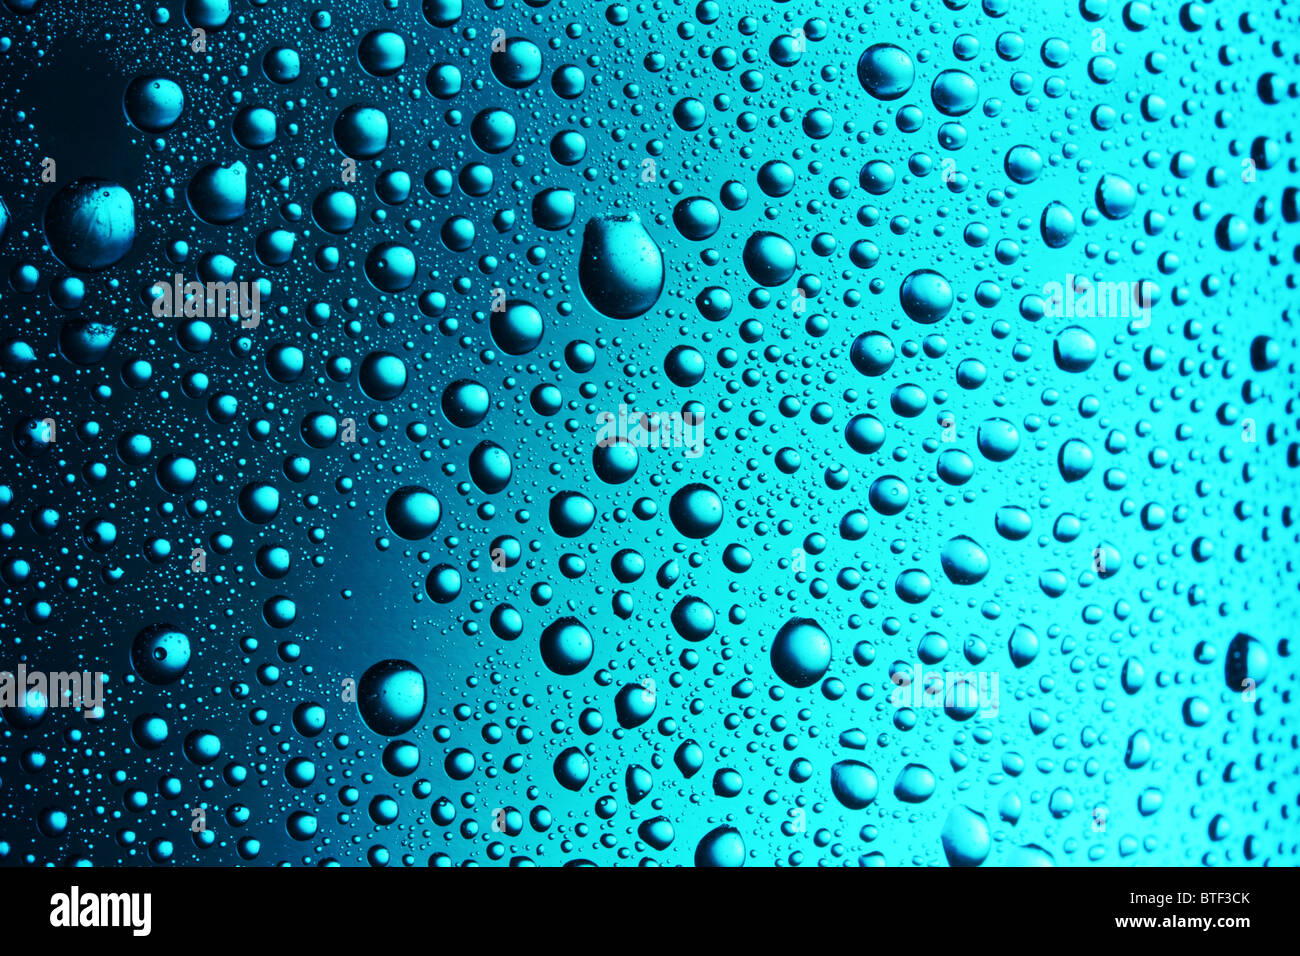 Texture of water drops on the bottle. Stock Photo